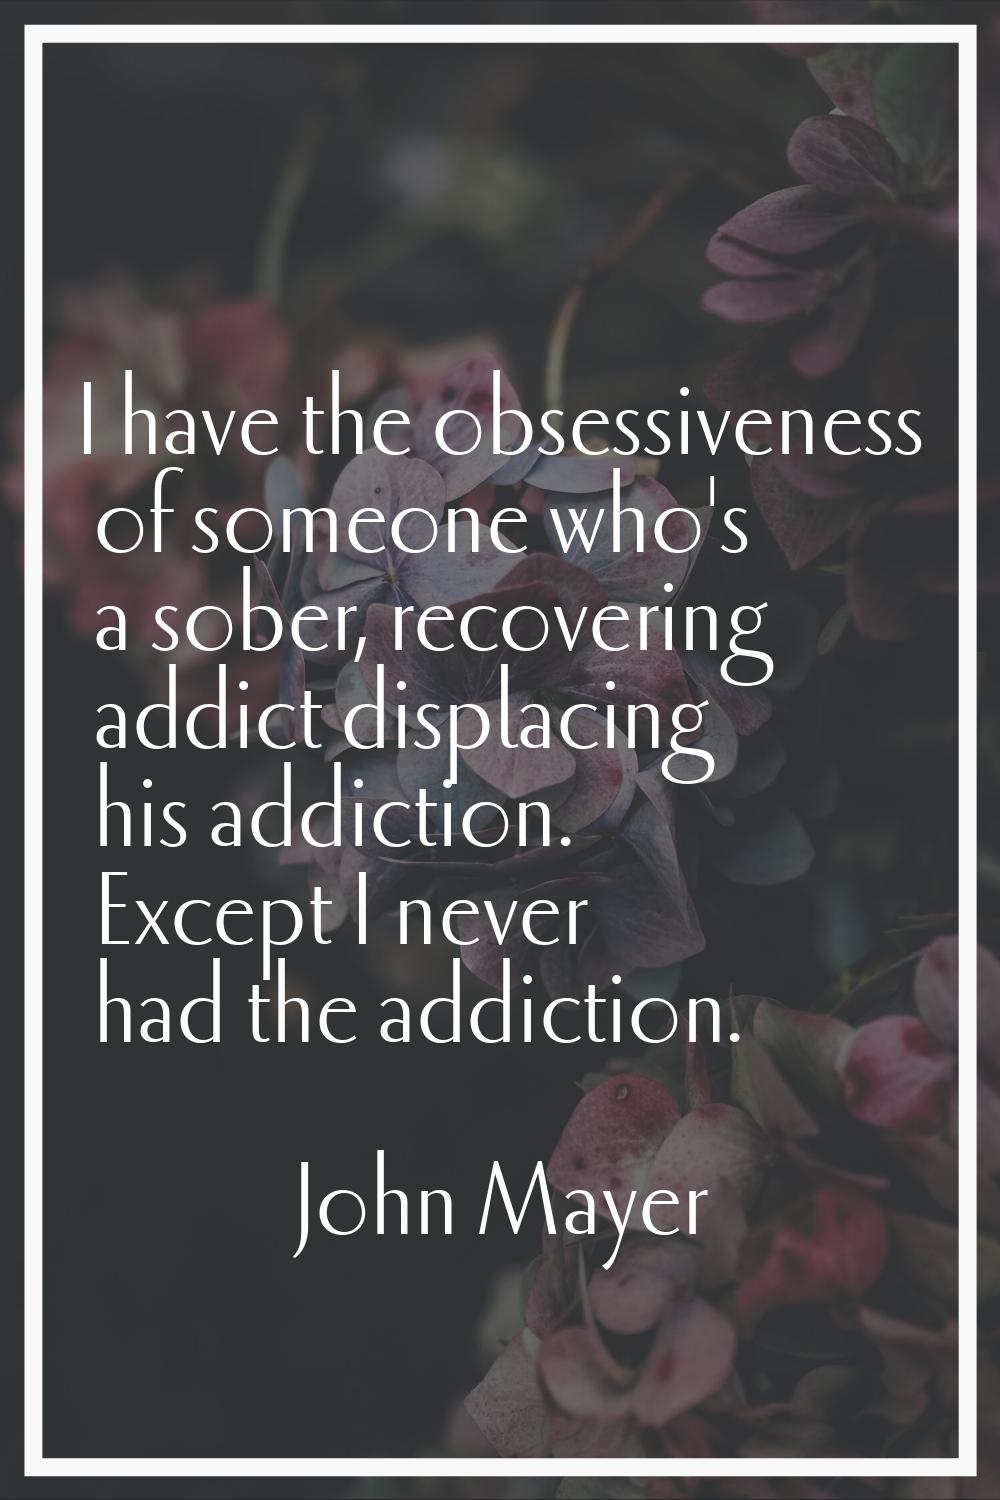 I have the obsessiveness of someone who's a sober, recovering addict displacing his addiction. Exce